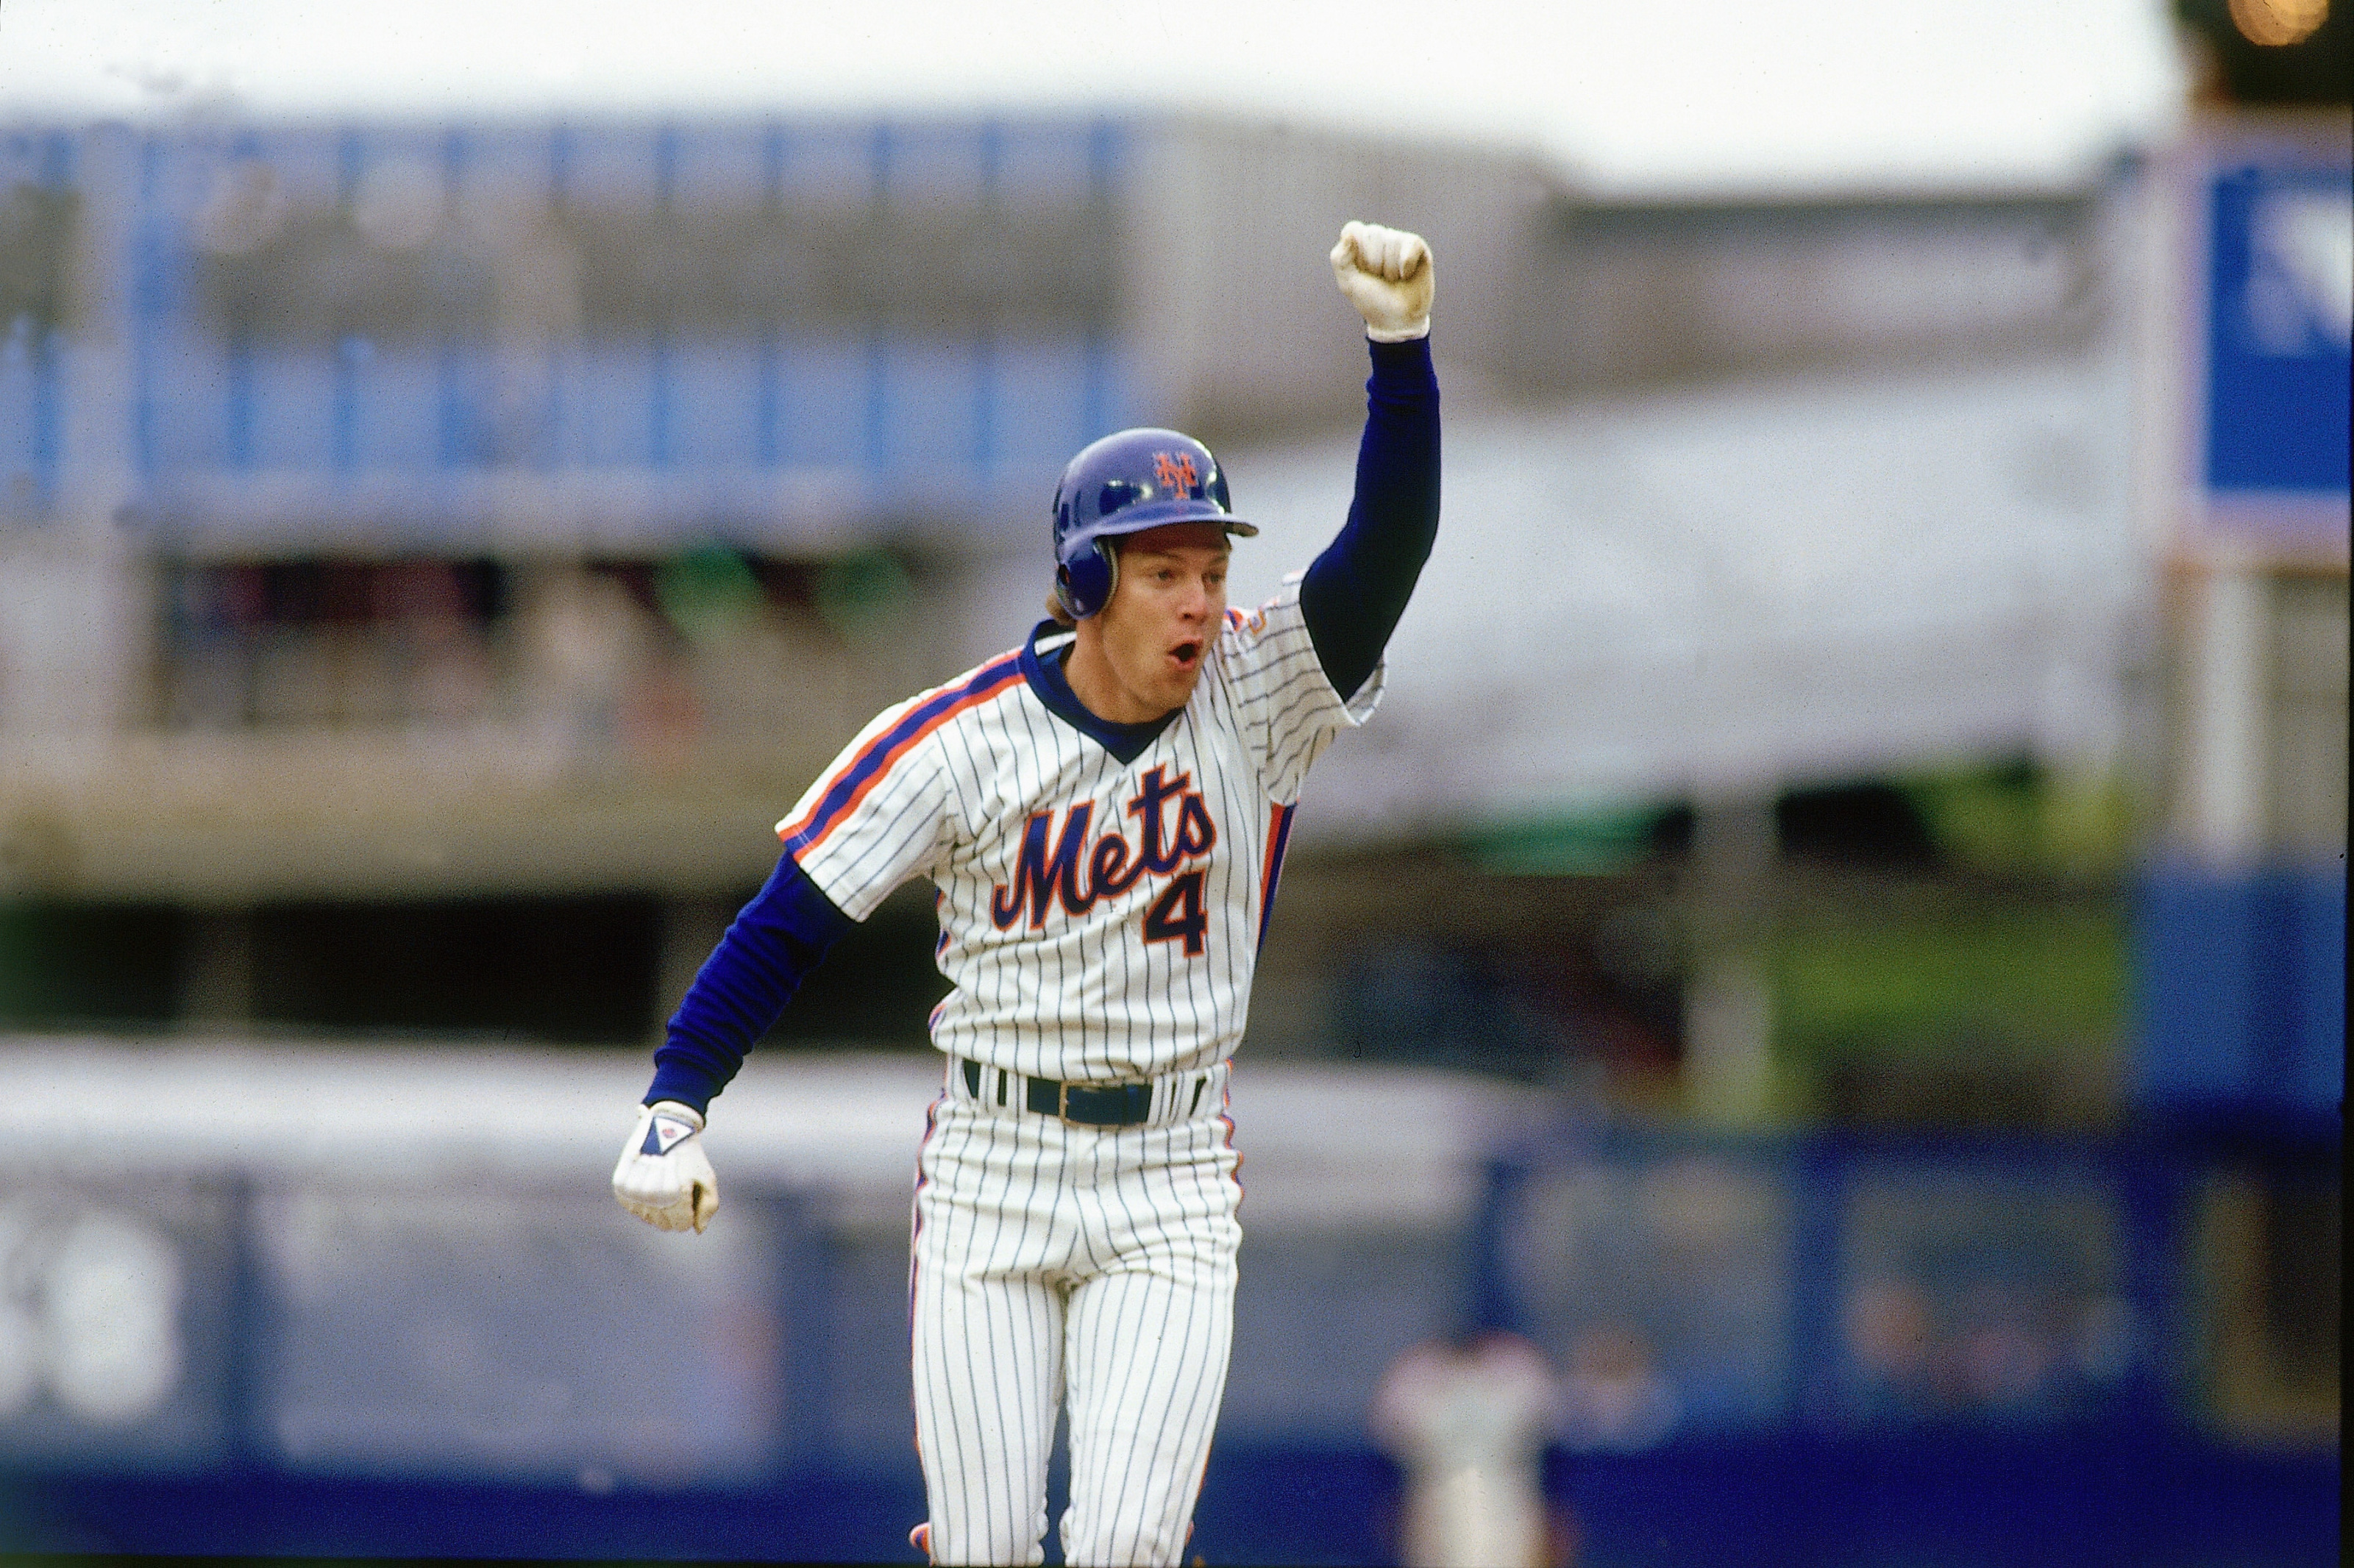 Ron Darling: Lenny Dykstra used racial slurs in 1986 World Series - Sports  Illustrated